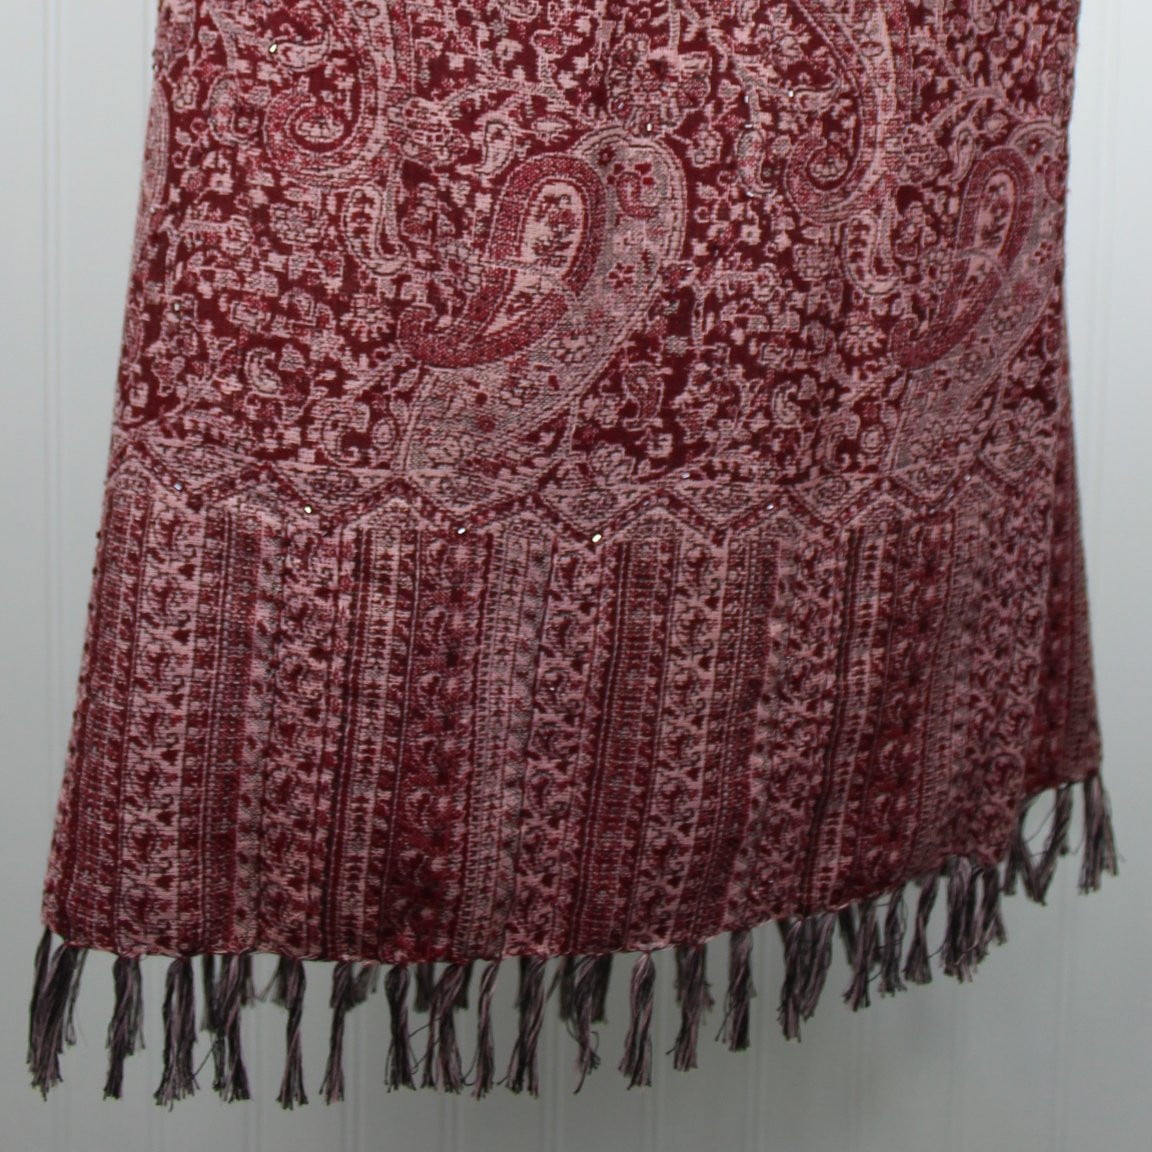 Nouveaux Petite Skirt Paisley Shades of Wine With Tiny Sparkles Fringe made in India